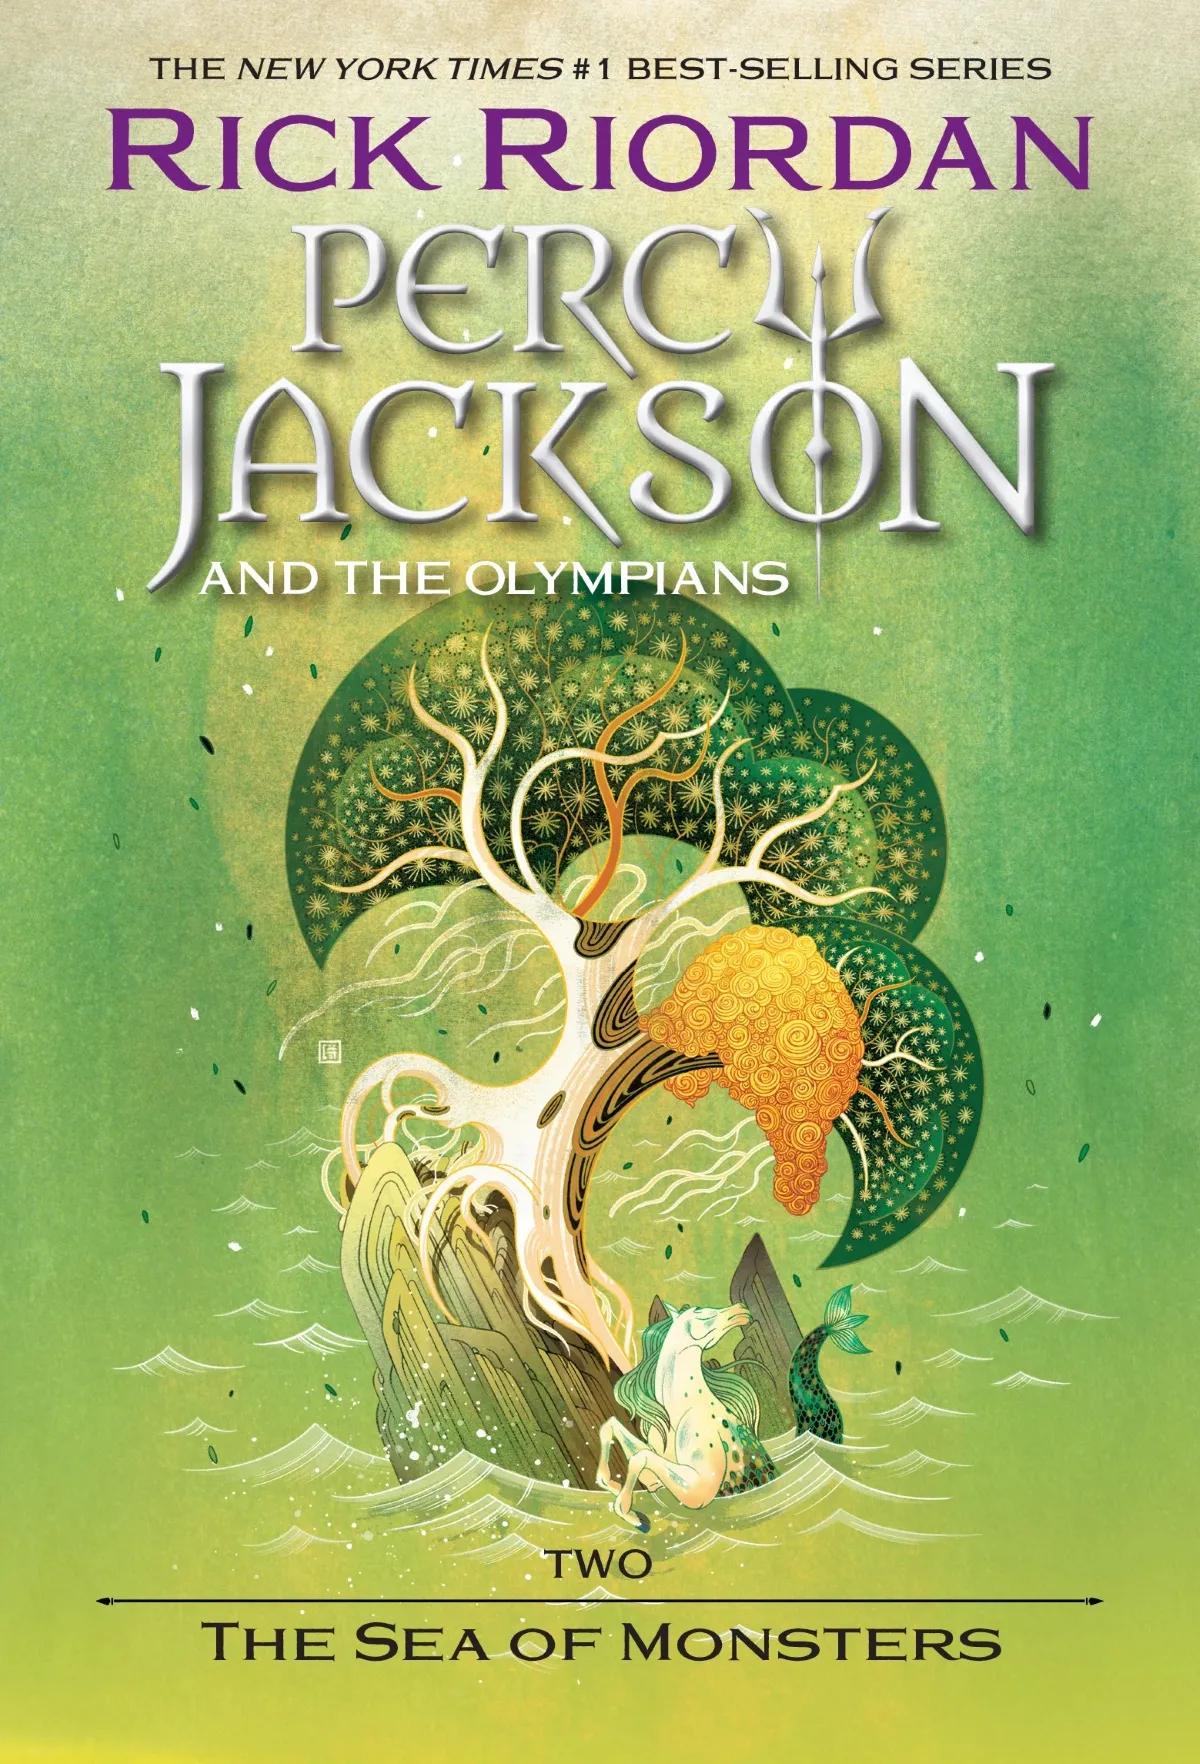 Percy Jackson and the Olympians Book 2 - The Sea of Monsters cover art (Disney Hyperion)